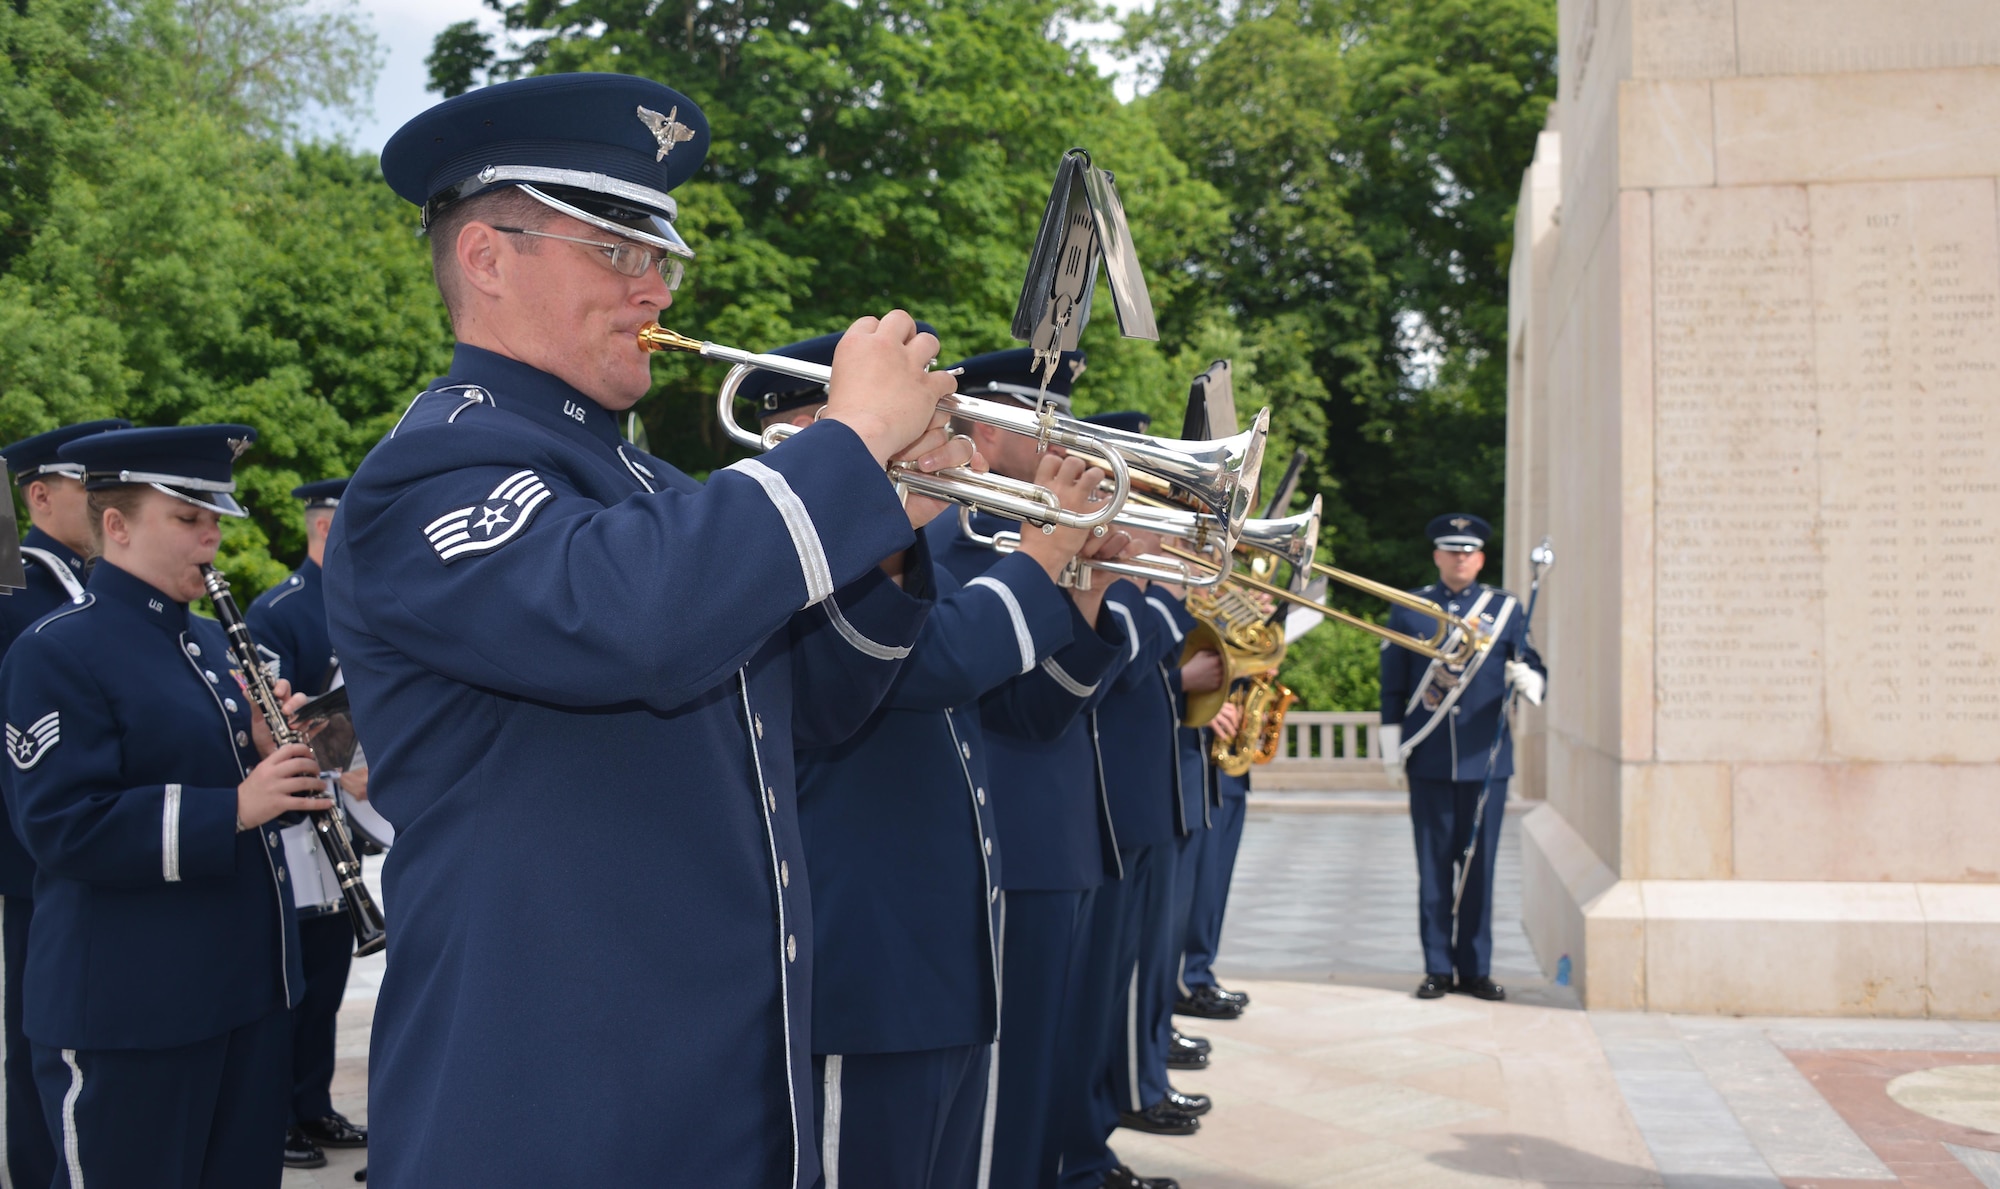 Airmen from the U.S. Air Forces in Europe Band play the national anthems of France and
the United States during a Memorial Day ceremony at the Lafayette Escadrille Memorial, in
Marnes-la-Coquette, France, May 28, 2017. This Memorial Day is especially signifcant because
2017 marks the centennial of United States’ entry into the First World War. (U.S. Air Force photo
by Capt. Ben Sowers/Released)